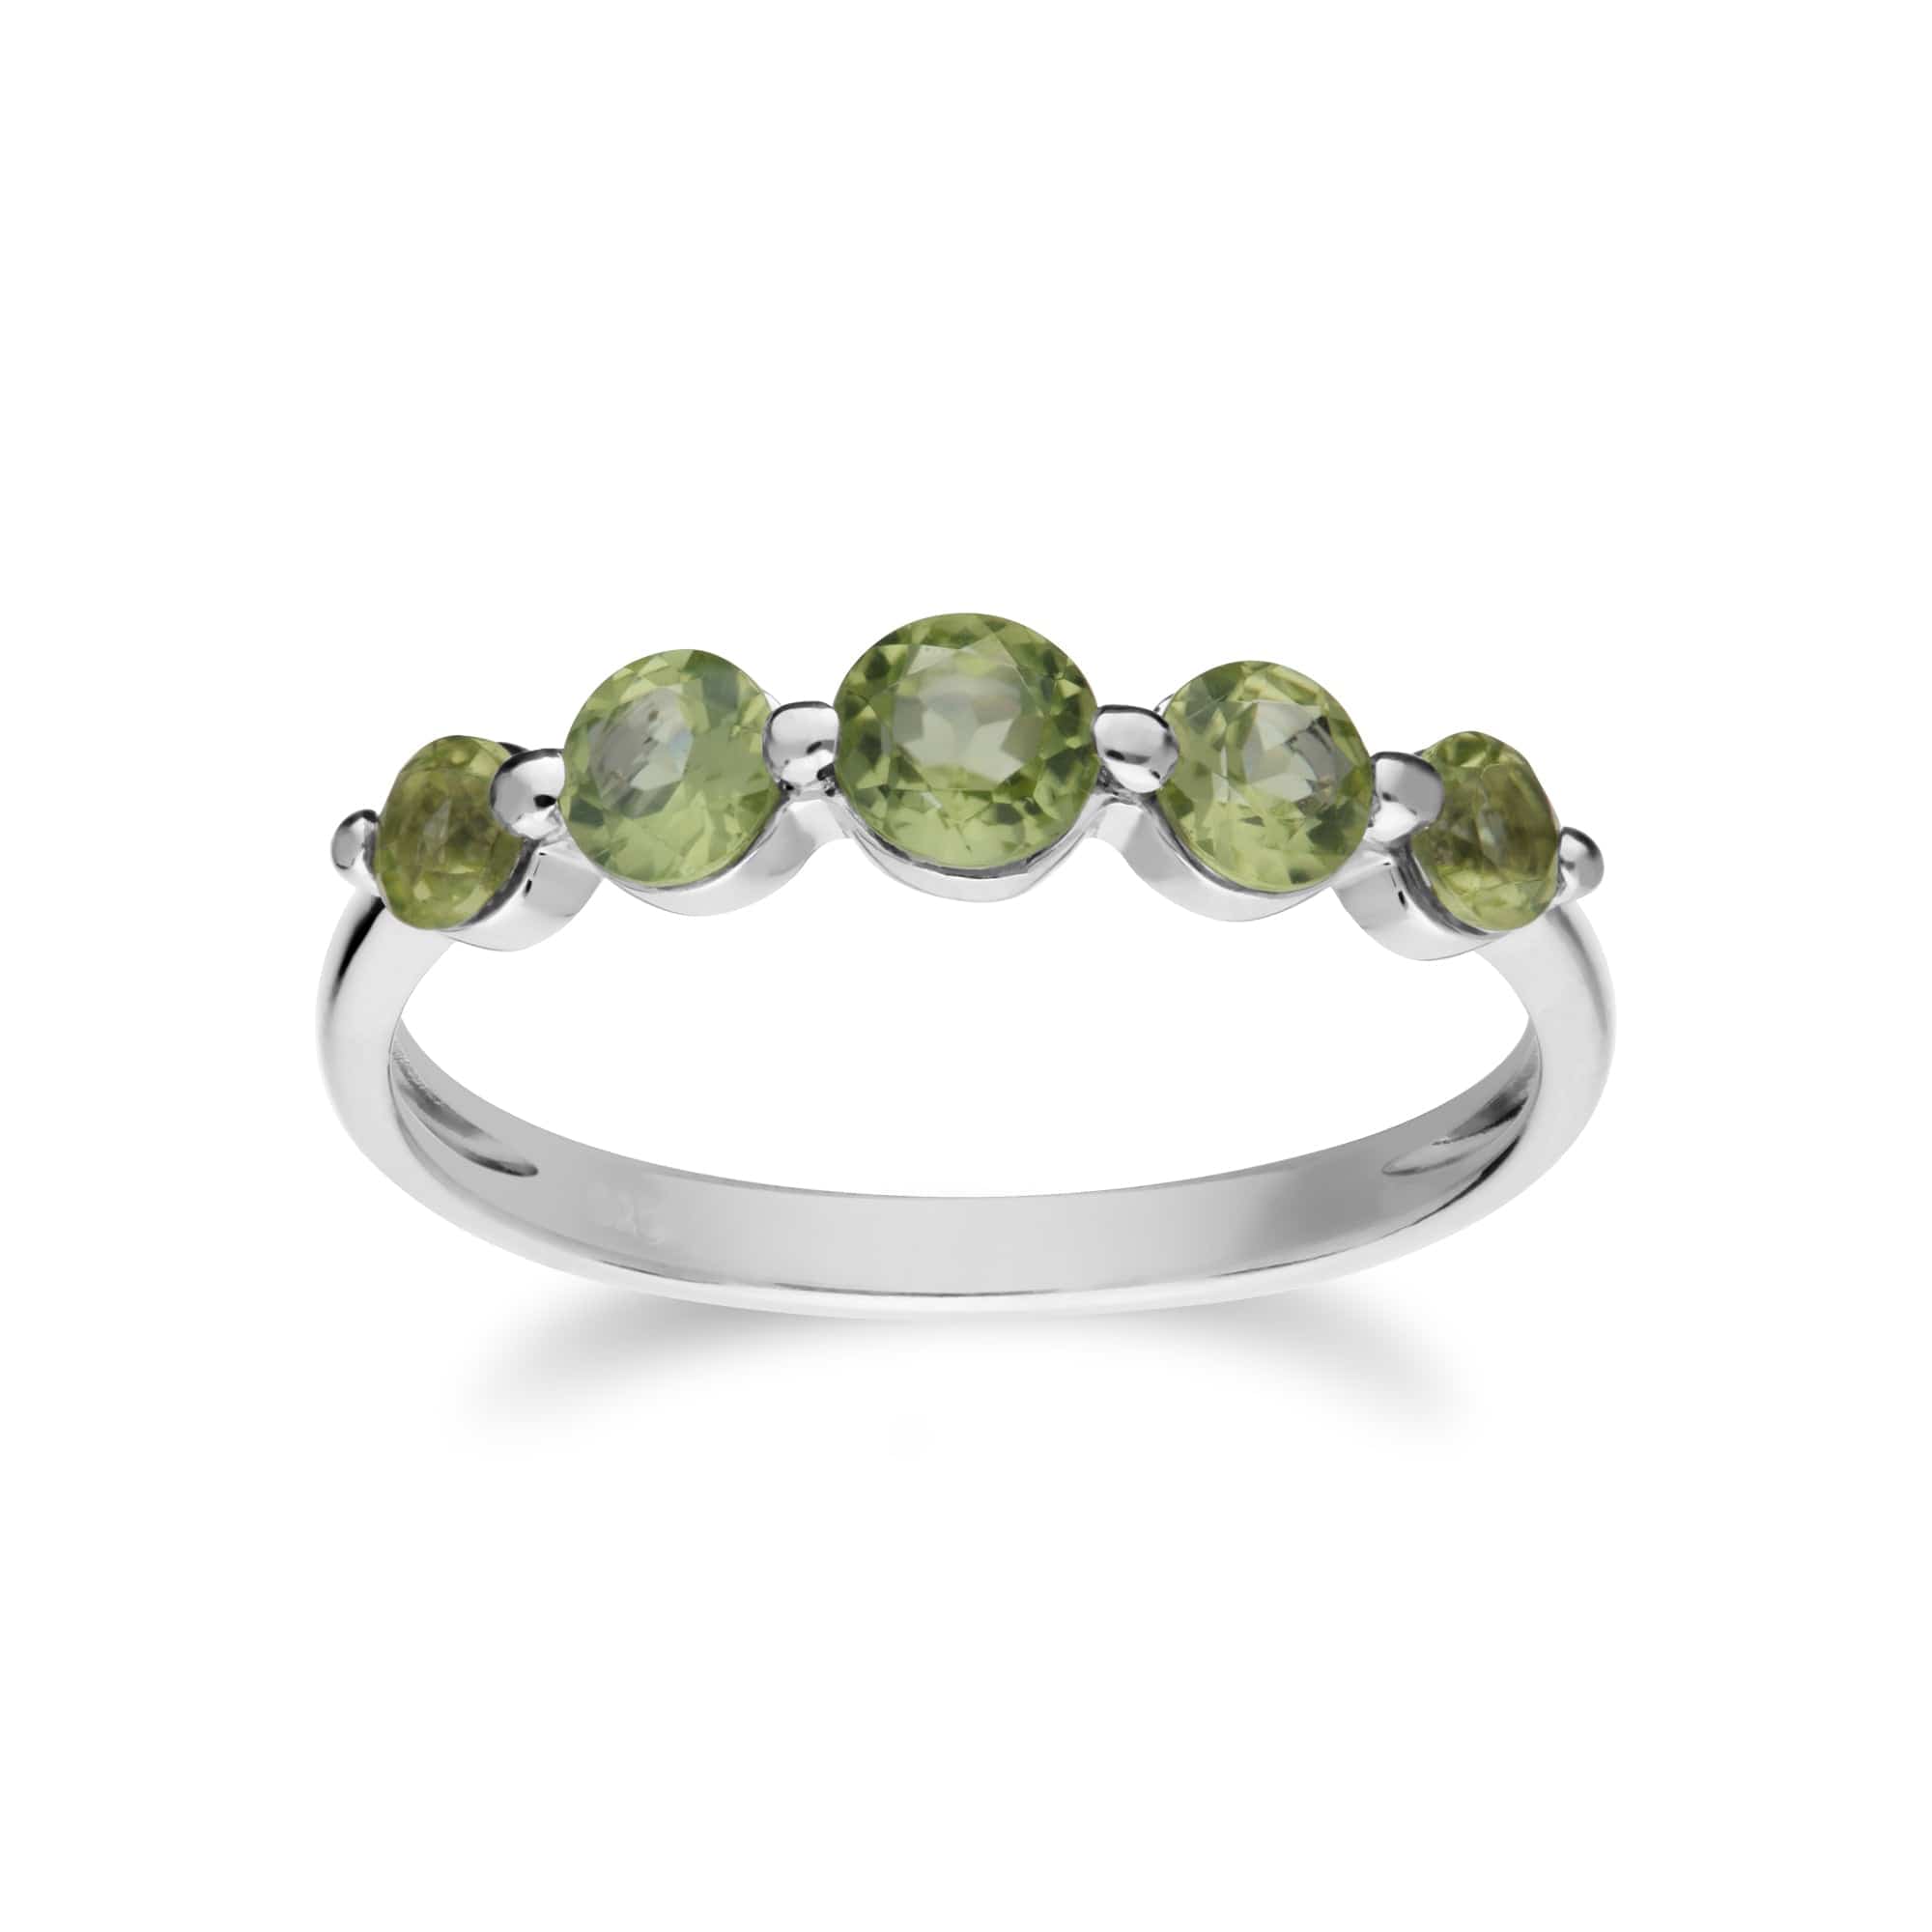 270E025504925-270R055904925 Classic Round Peridot Three Stone Gradient Earrings & Five Stone Ring Set in 925 Sterling Silver 3